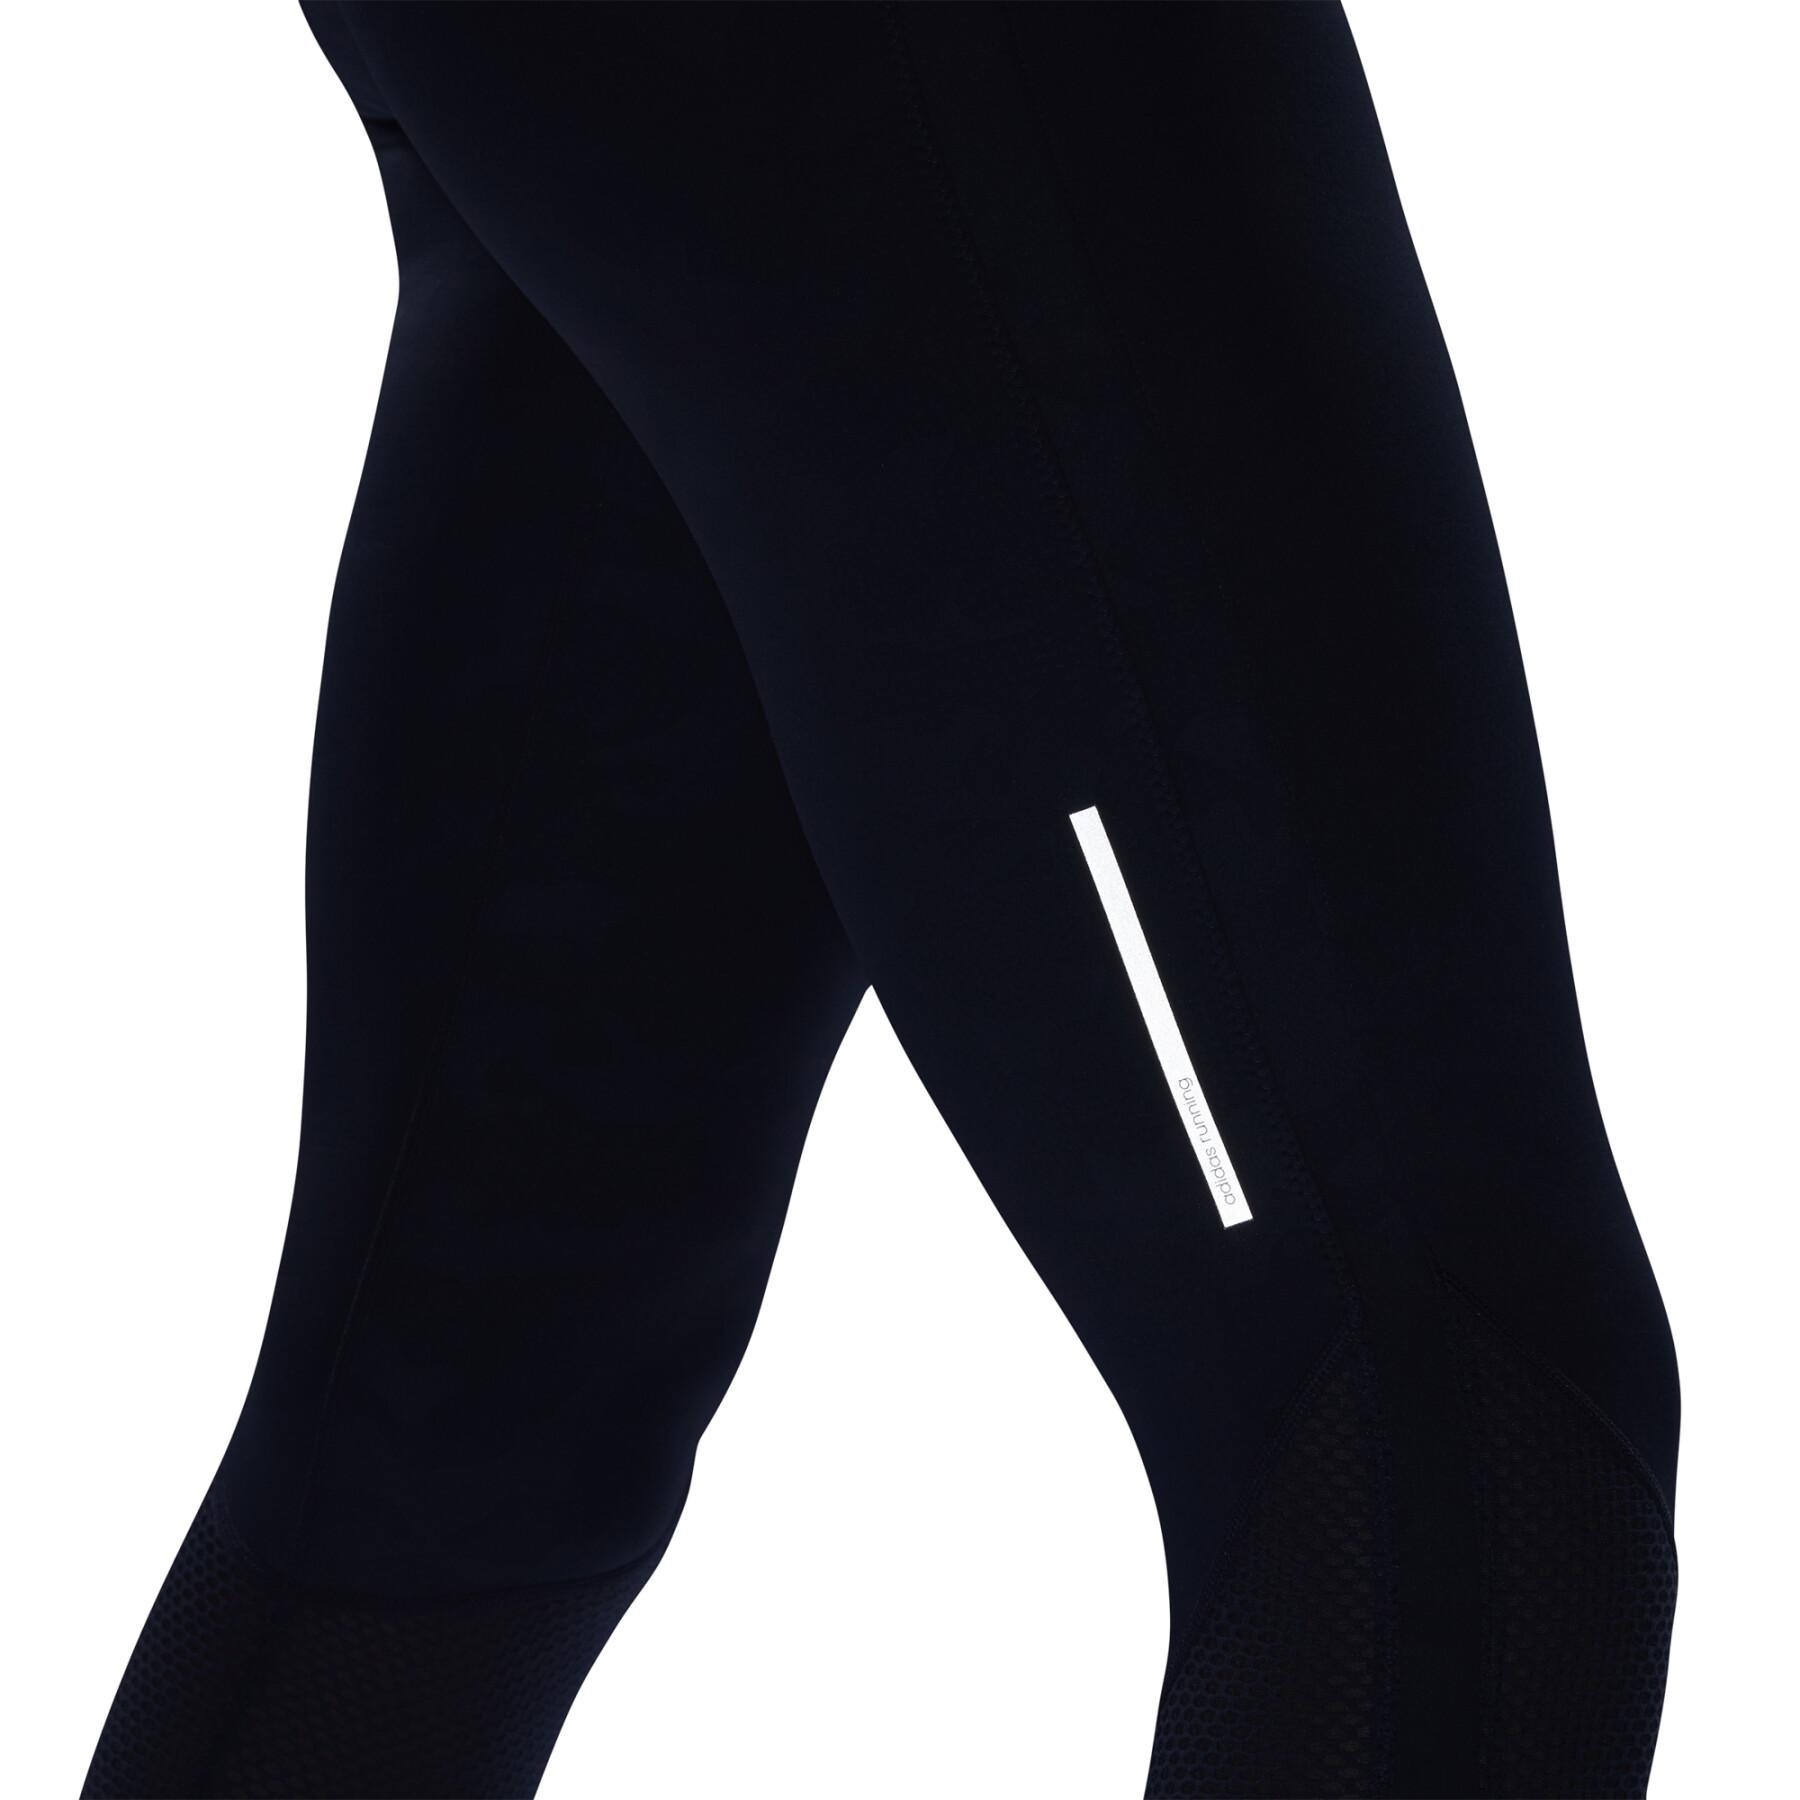 Legging mujer adidas Own the Run 7/8 Graphic